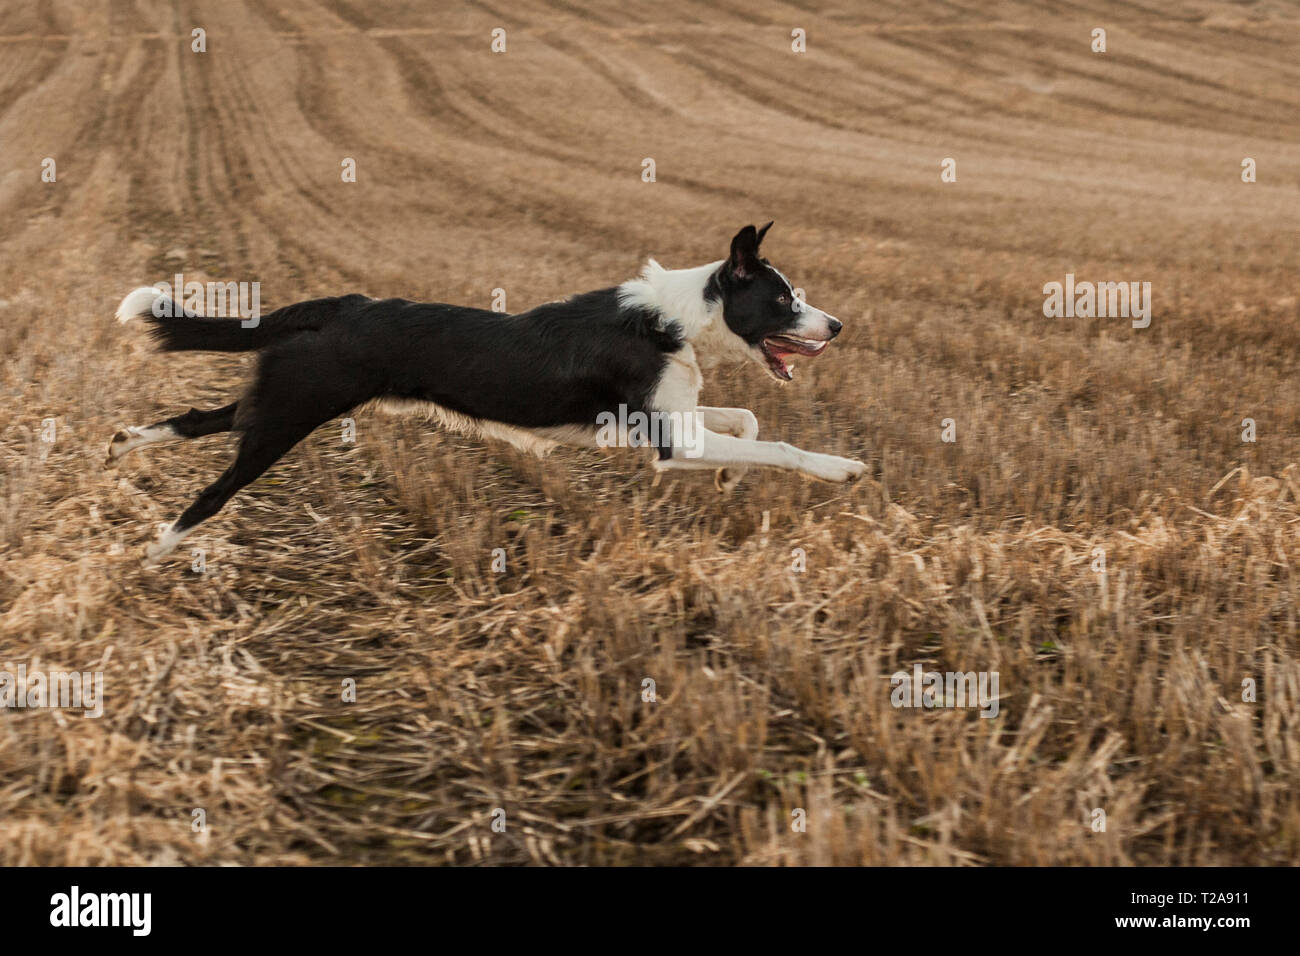 Short haired border collie dog running on a field Stock Photo - Alamy